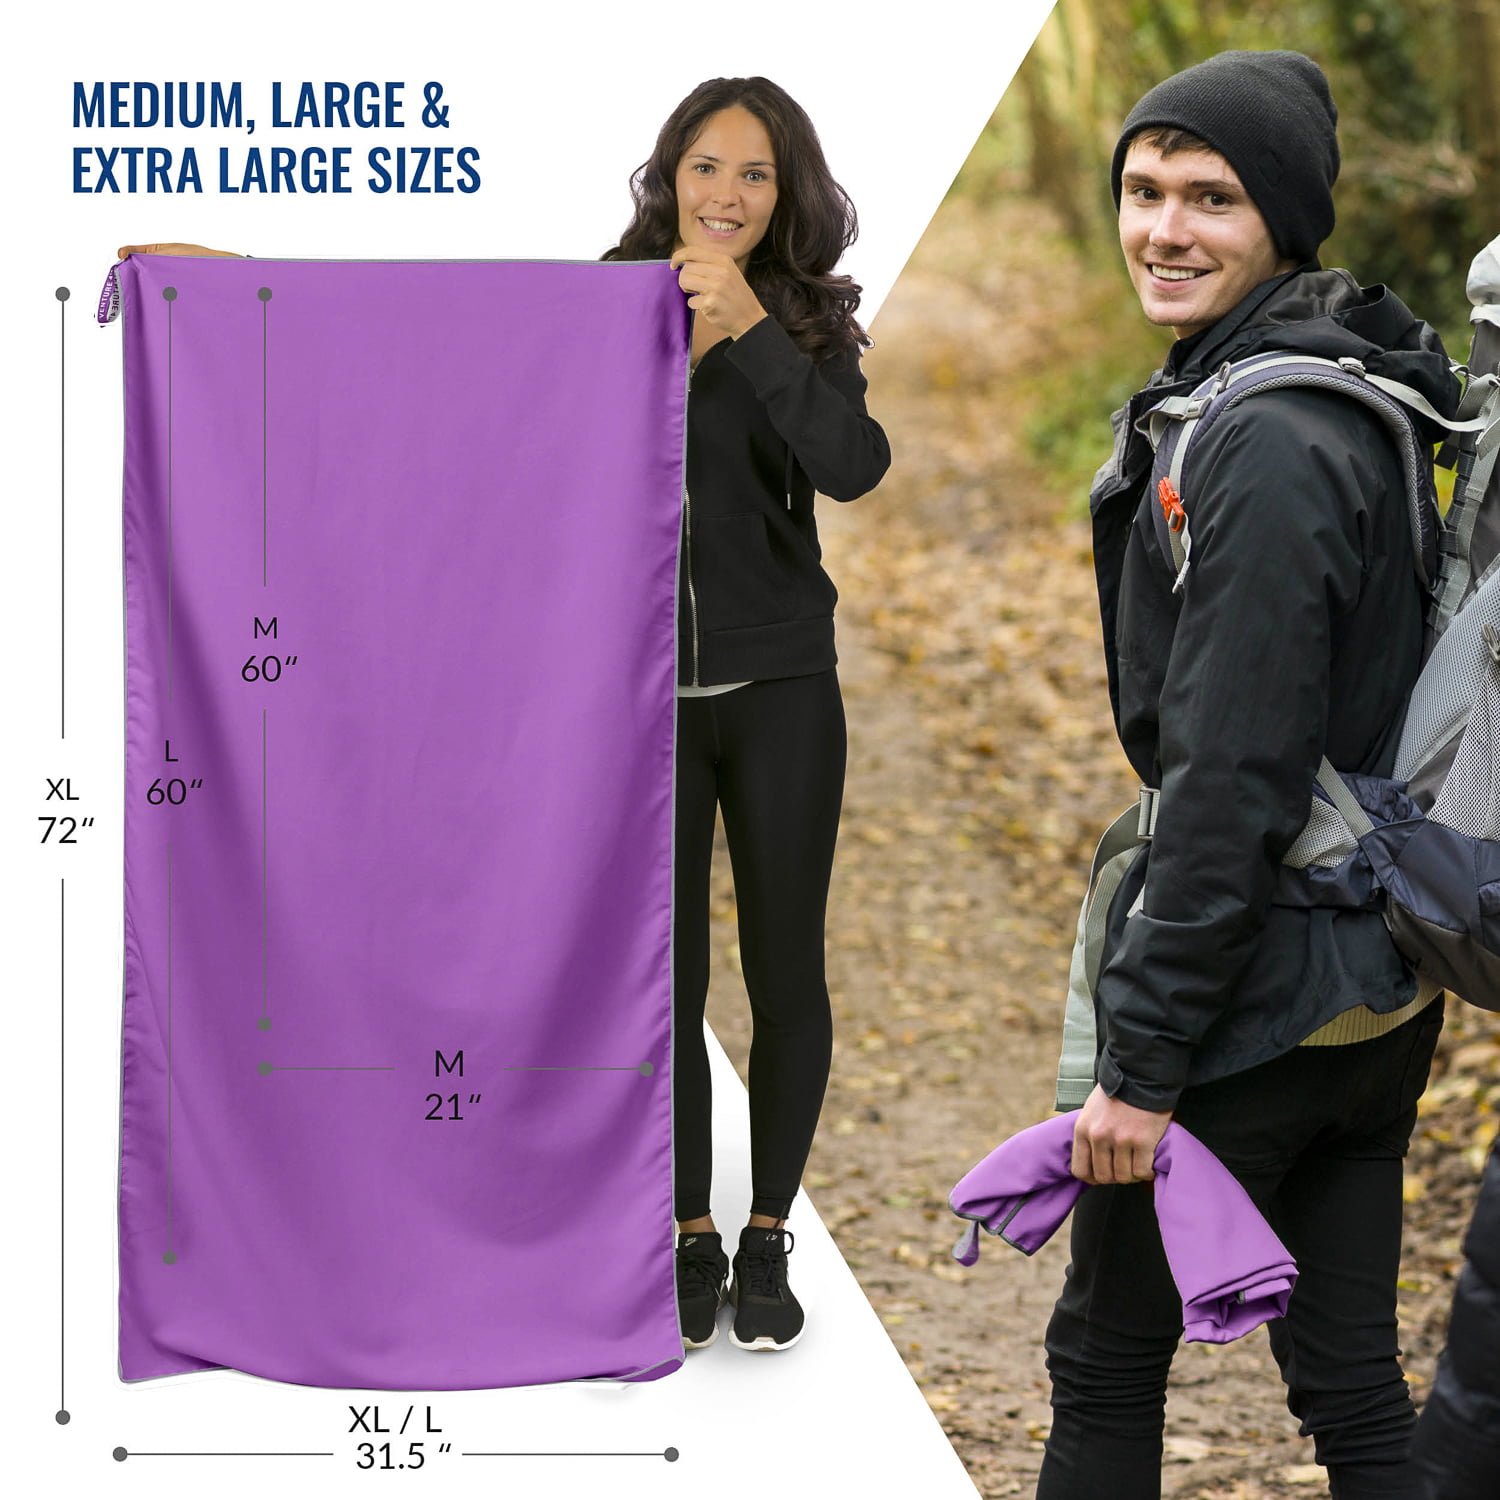 Essential for Camping Sports and Beach VENTURE 4TH Quick Dry Travel Towel Fast Drying Ultra Soft Microfiber Towels Gym 3 Compact Sizes Yoga Backpacking Swimming 